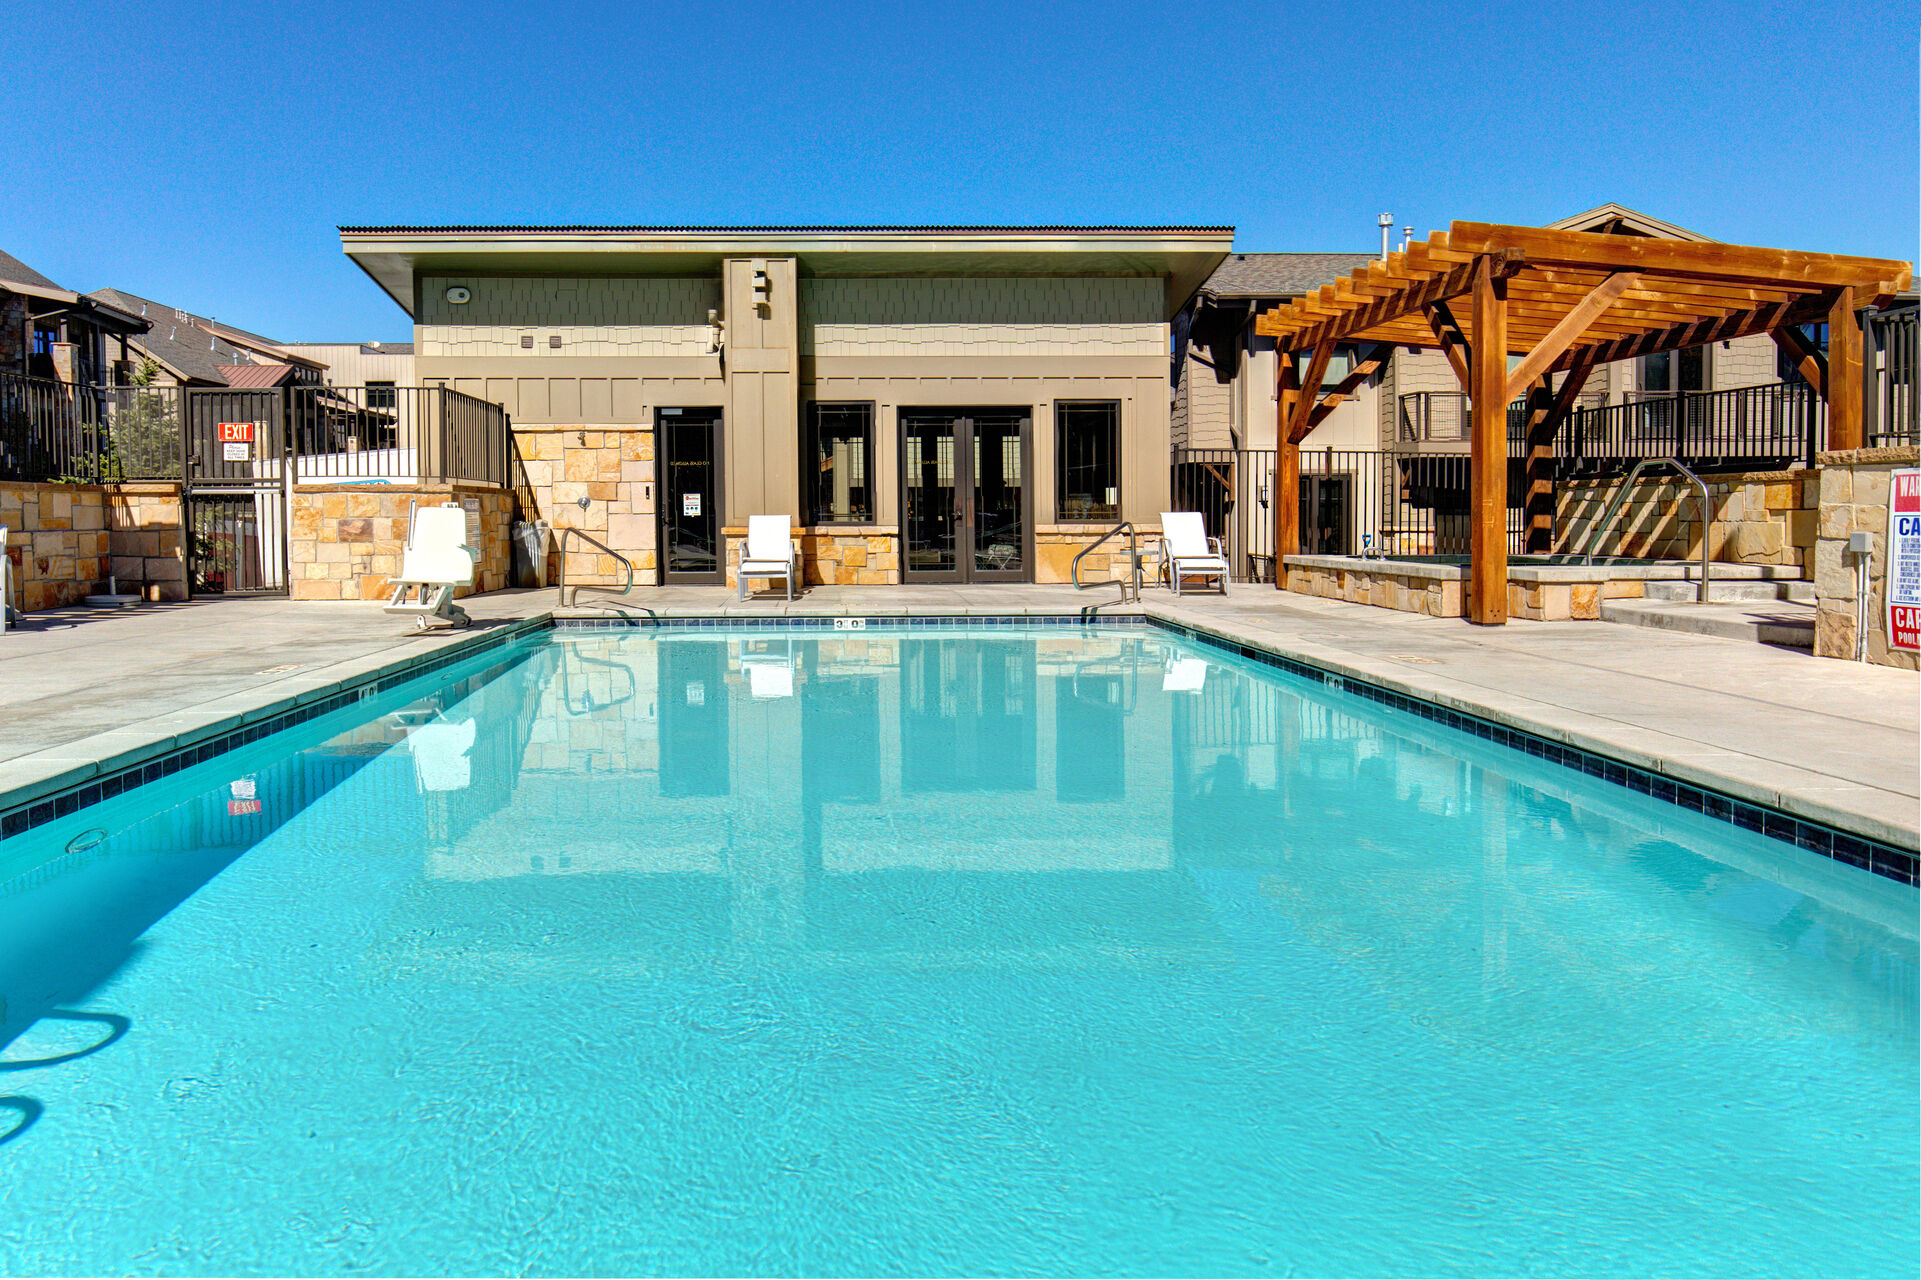 Blackstone Clubhouse with communal fitness center and year-round pool/hot tub